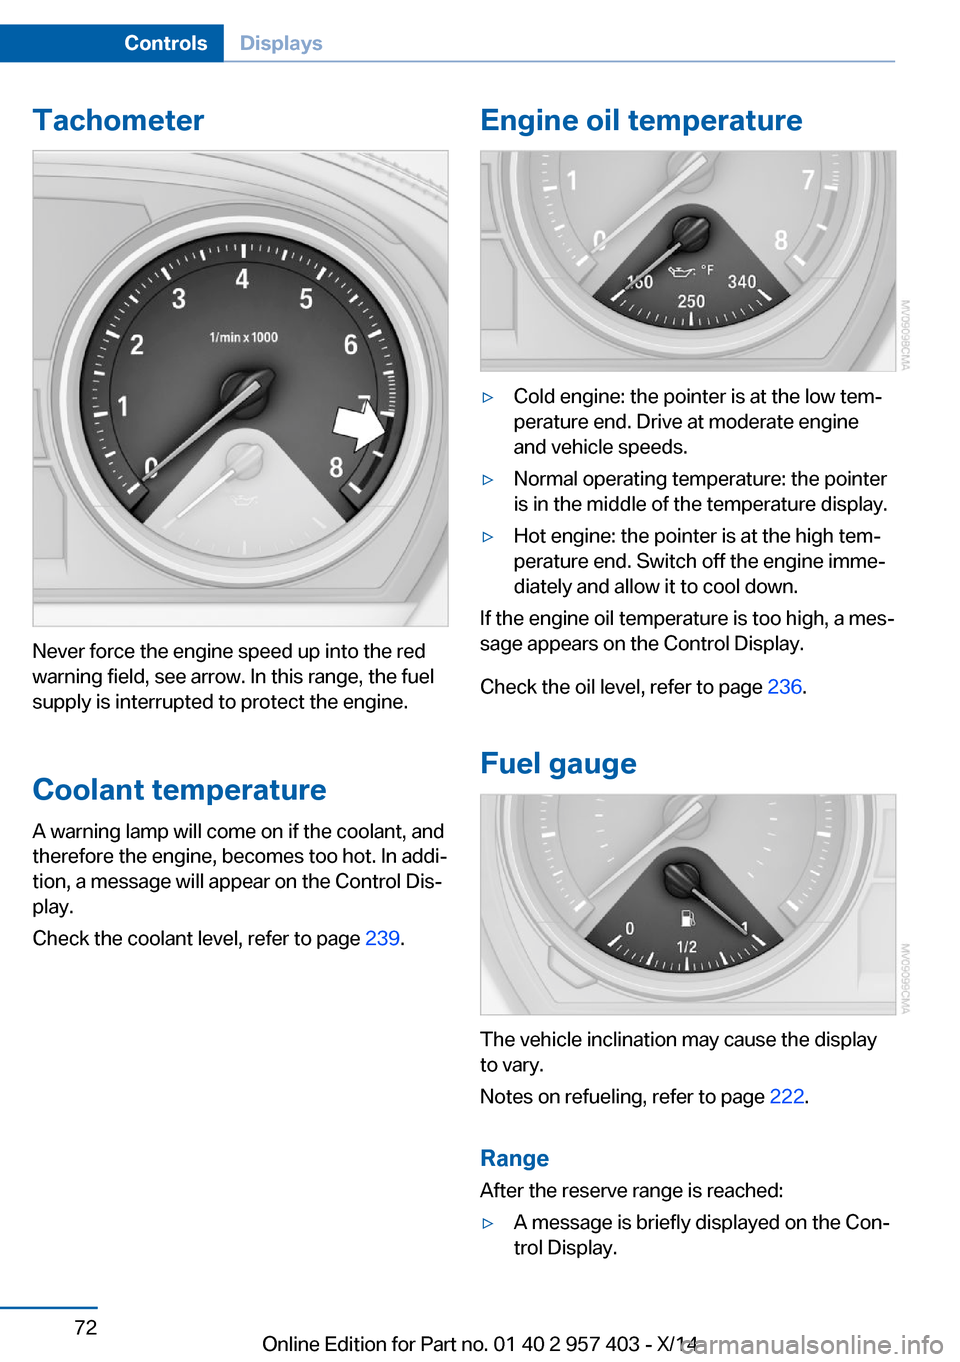 BMW Z4 2016 E89 Owners Guide Tachometer
Never force the engine speed up into the red
warning field, see arrow. In this range, the fuel
supply is interrupted to protect the engine.
Coolant temperature A warning lamp will come on i